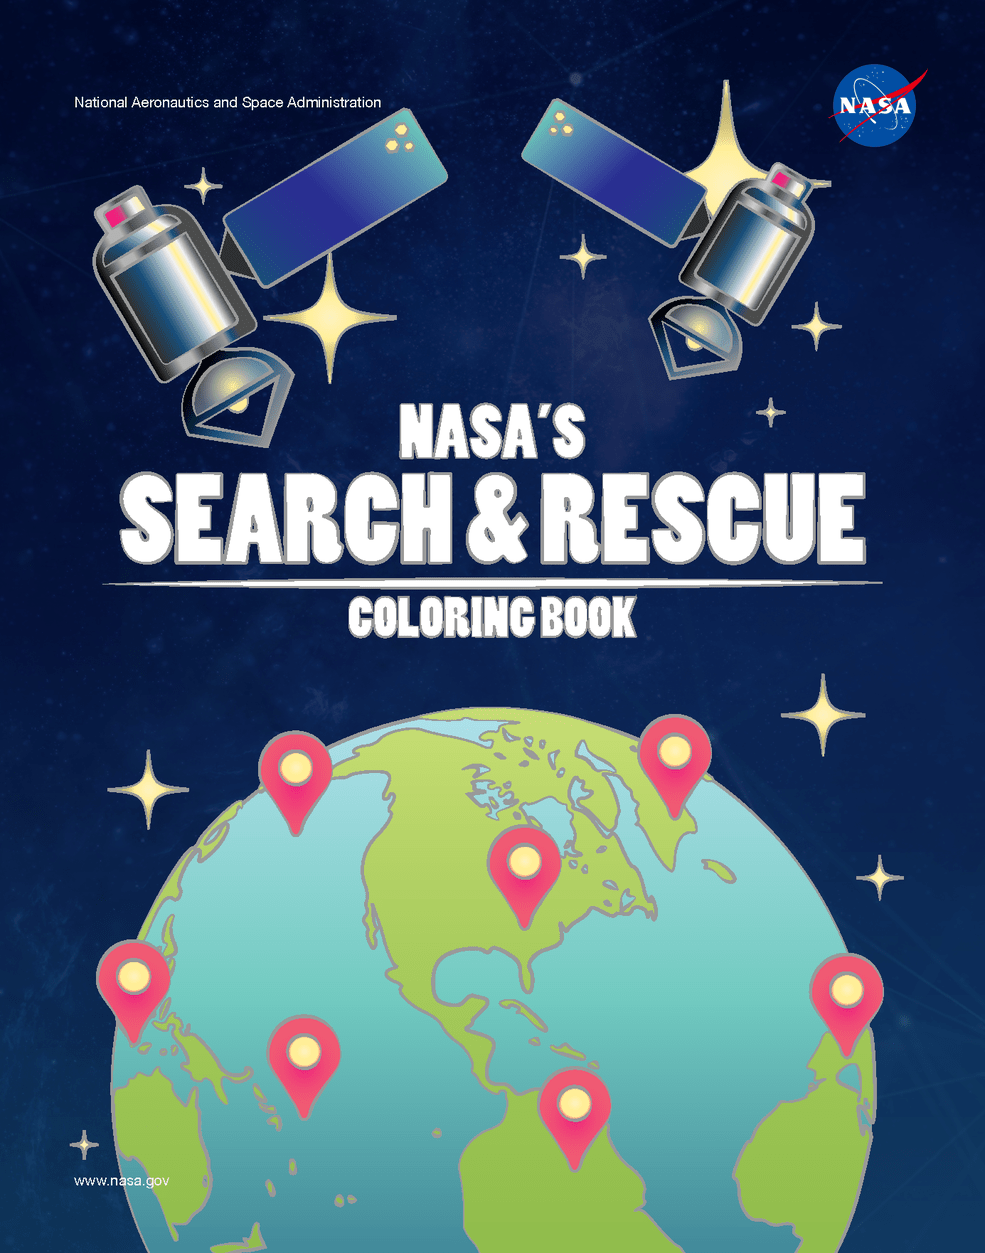 Illustration o the Earth with two satellites orbiting above. The text reads "NASA's Search & Rescue Coloring Book"